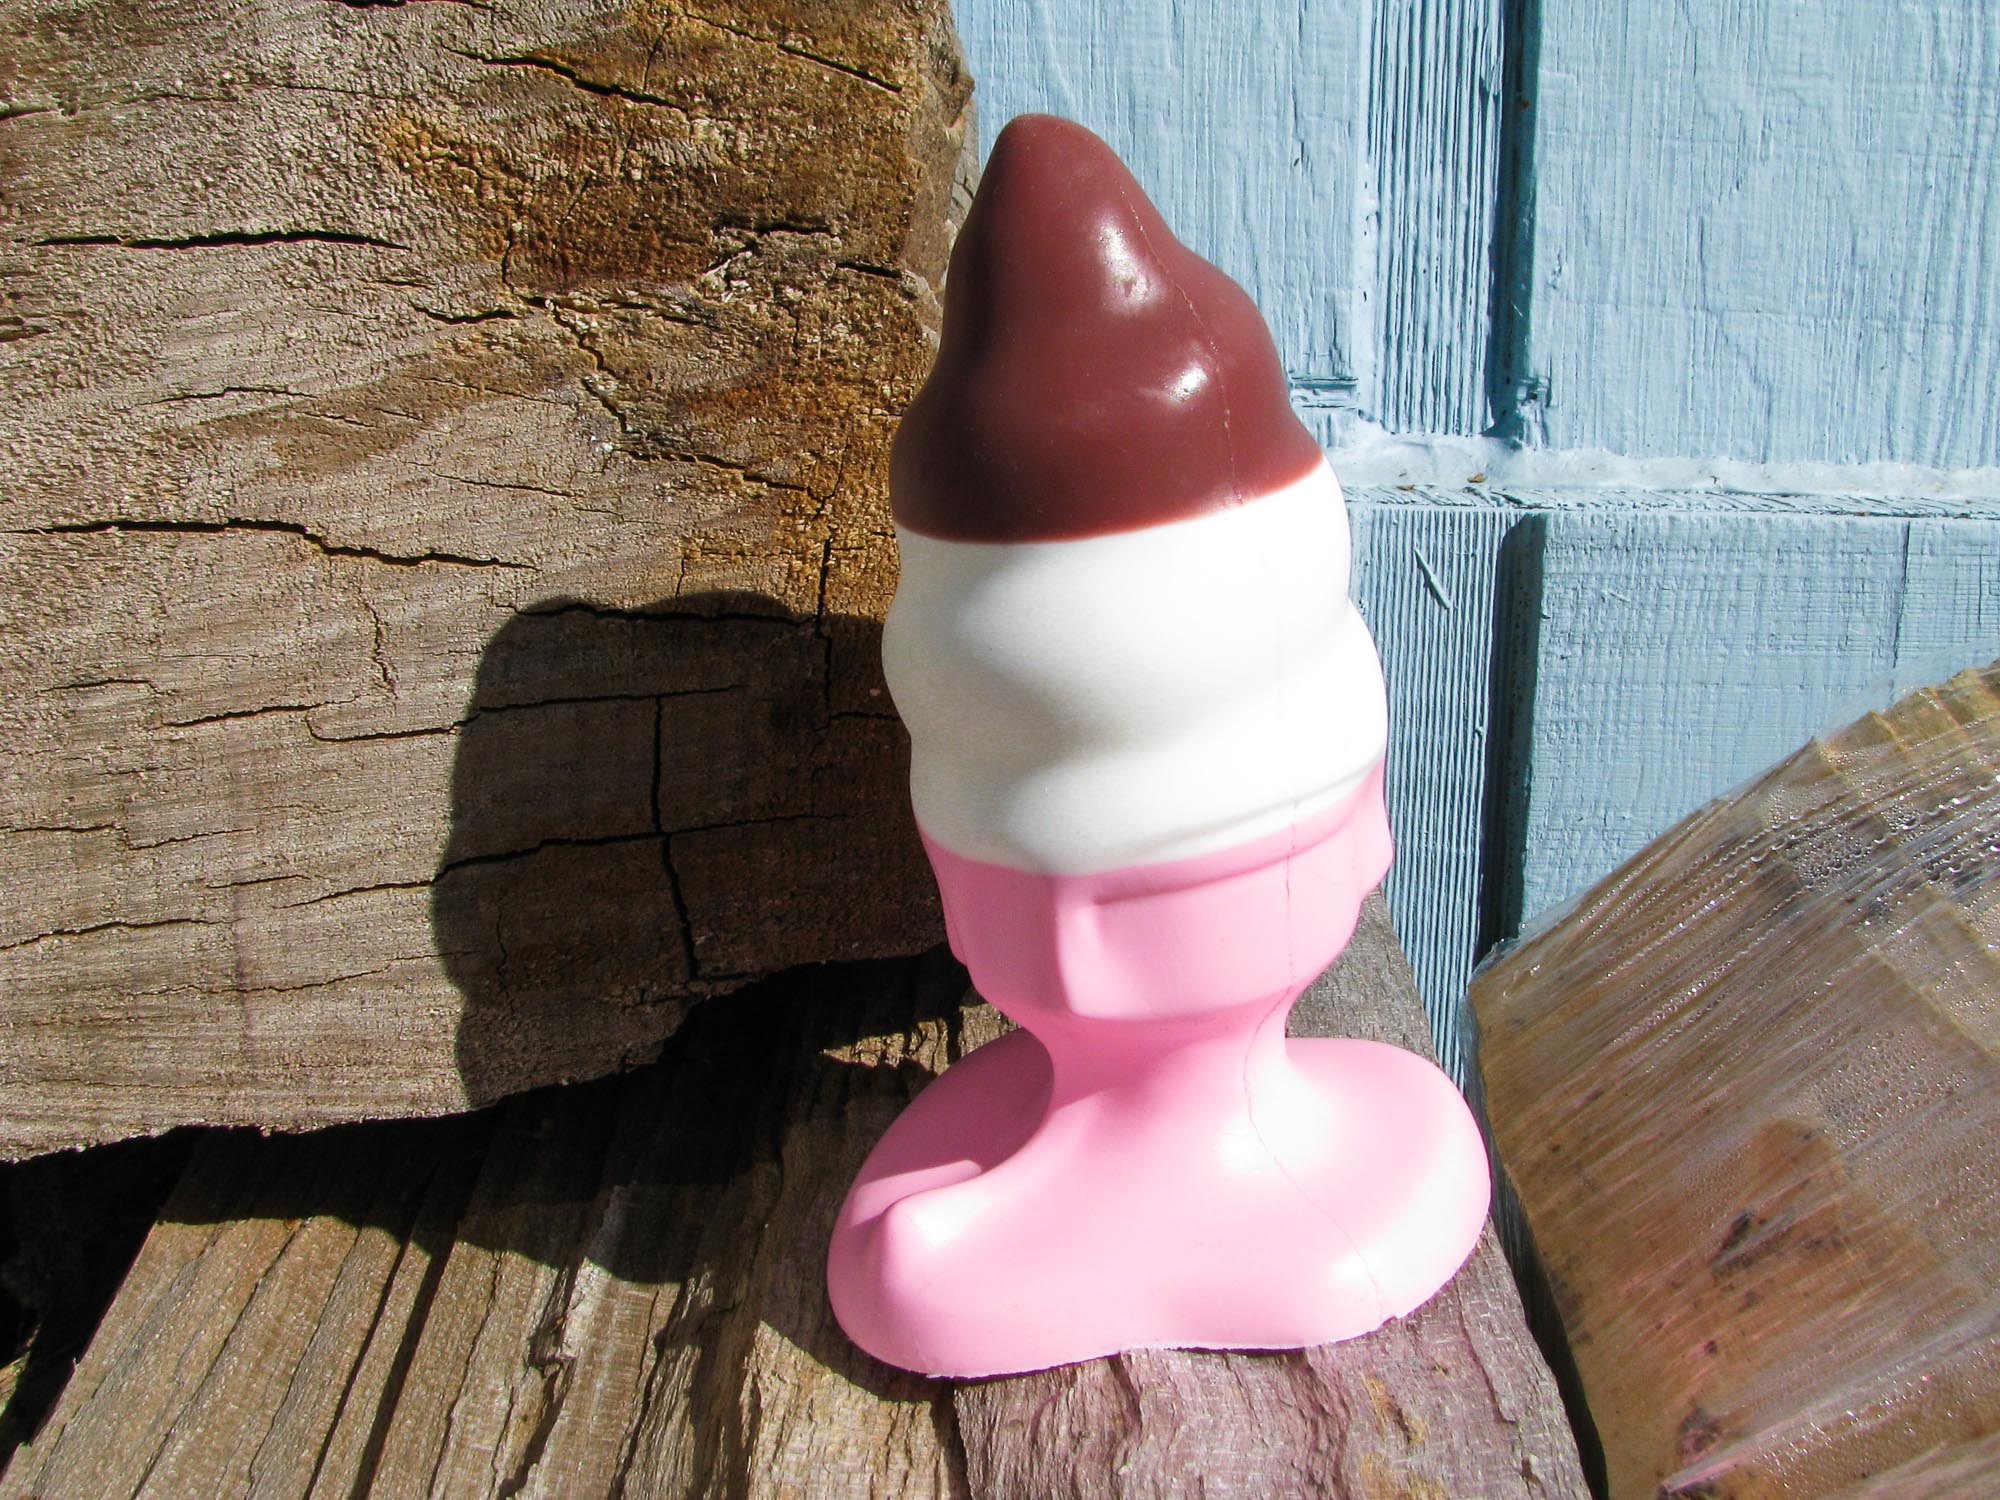 Hole Punch Toys Ass Cram Cone butt plug (which I used vaginally) standing on a wood pile in front of a pale blue house.